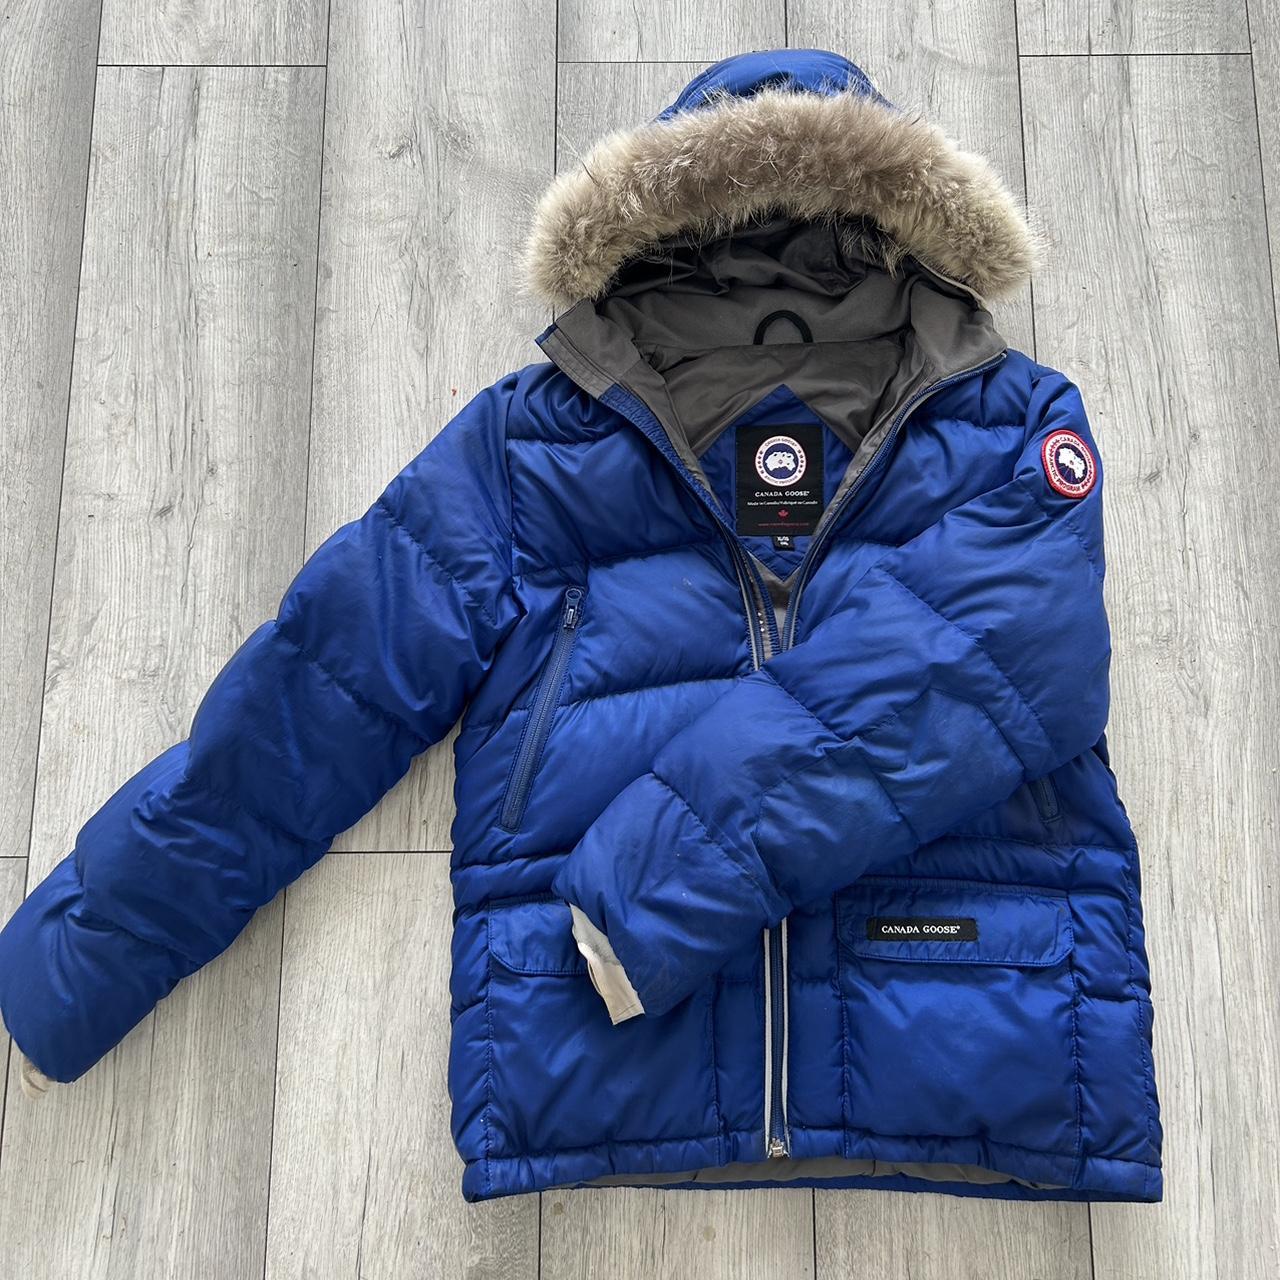 Authentic Canada goose jacket Size 18 kids will fit... - Depop